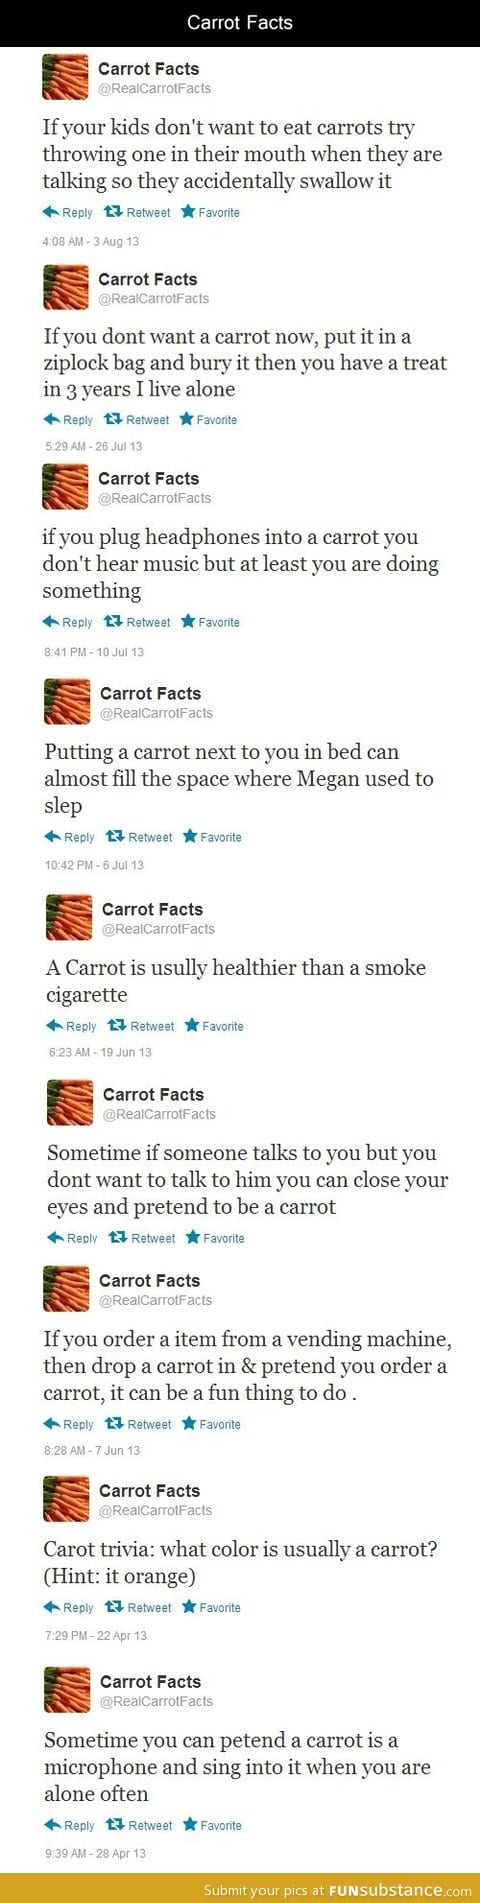 Interesting Carrot Facts